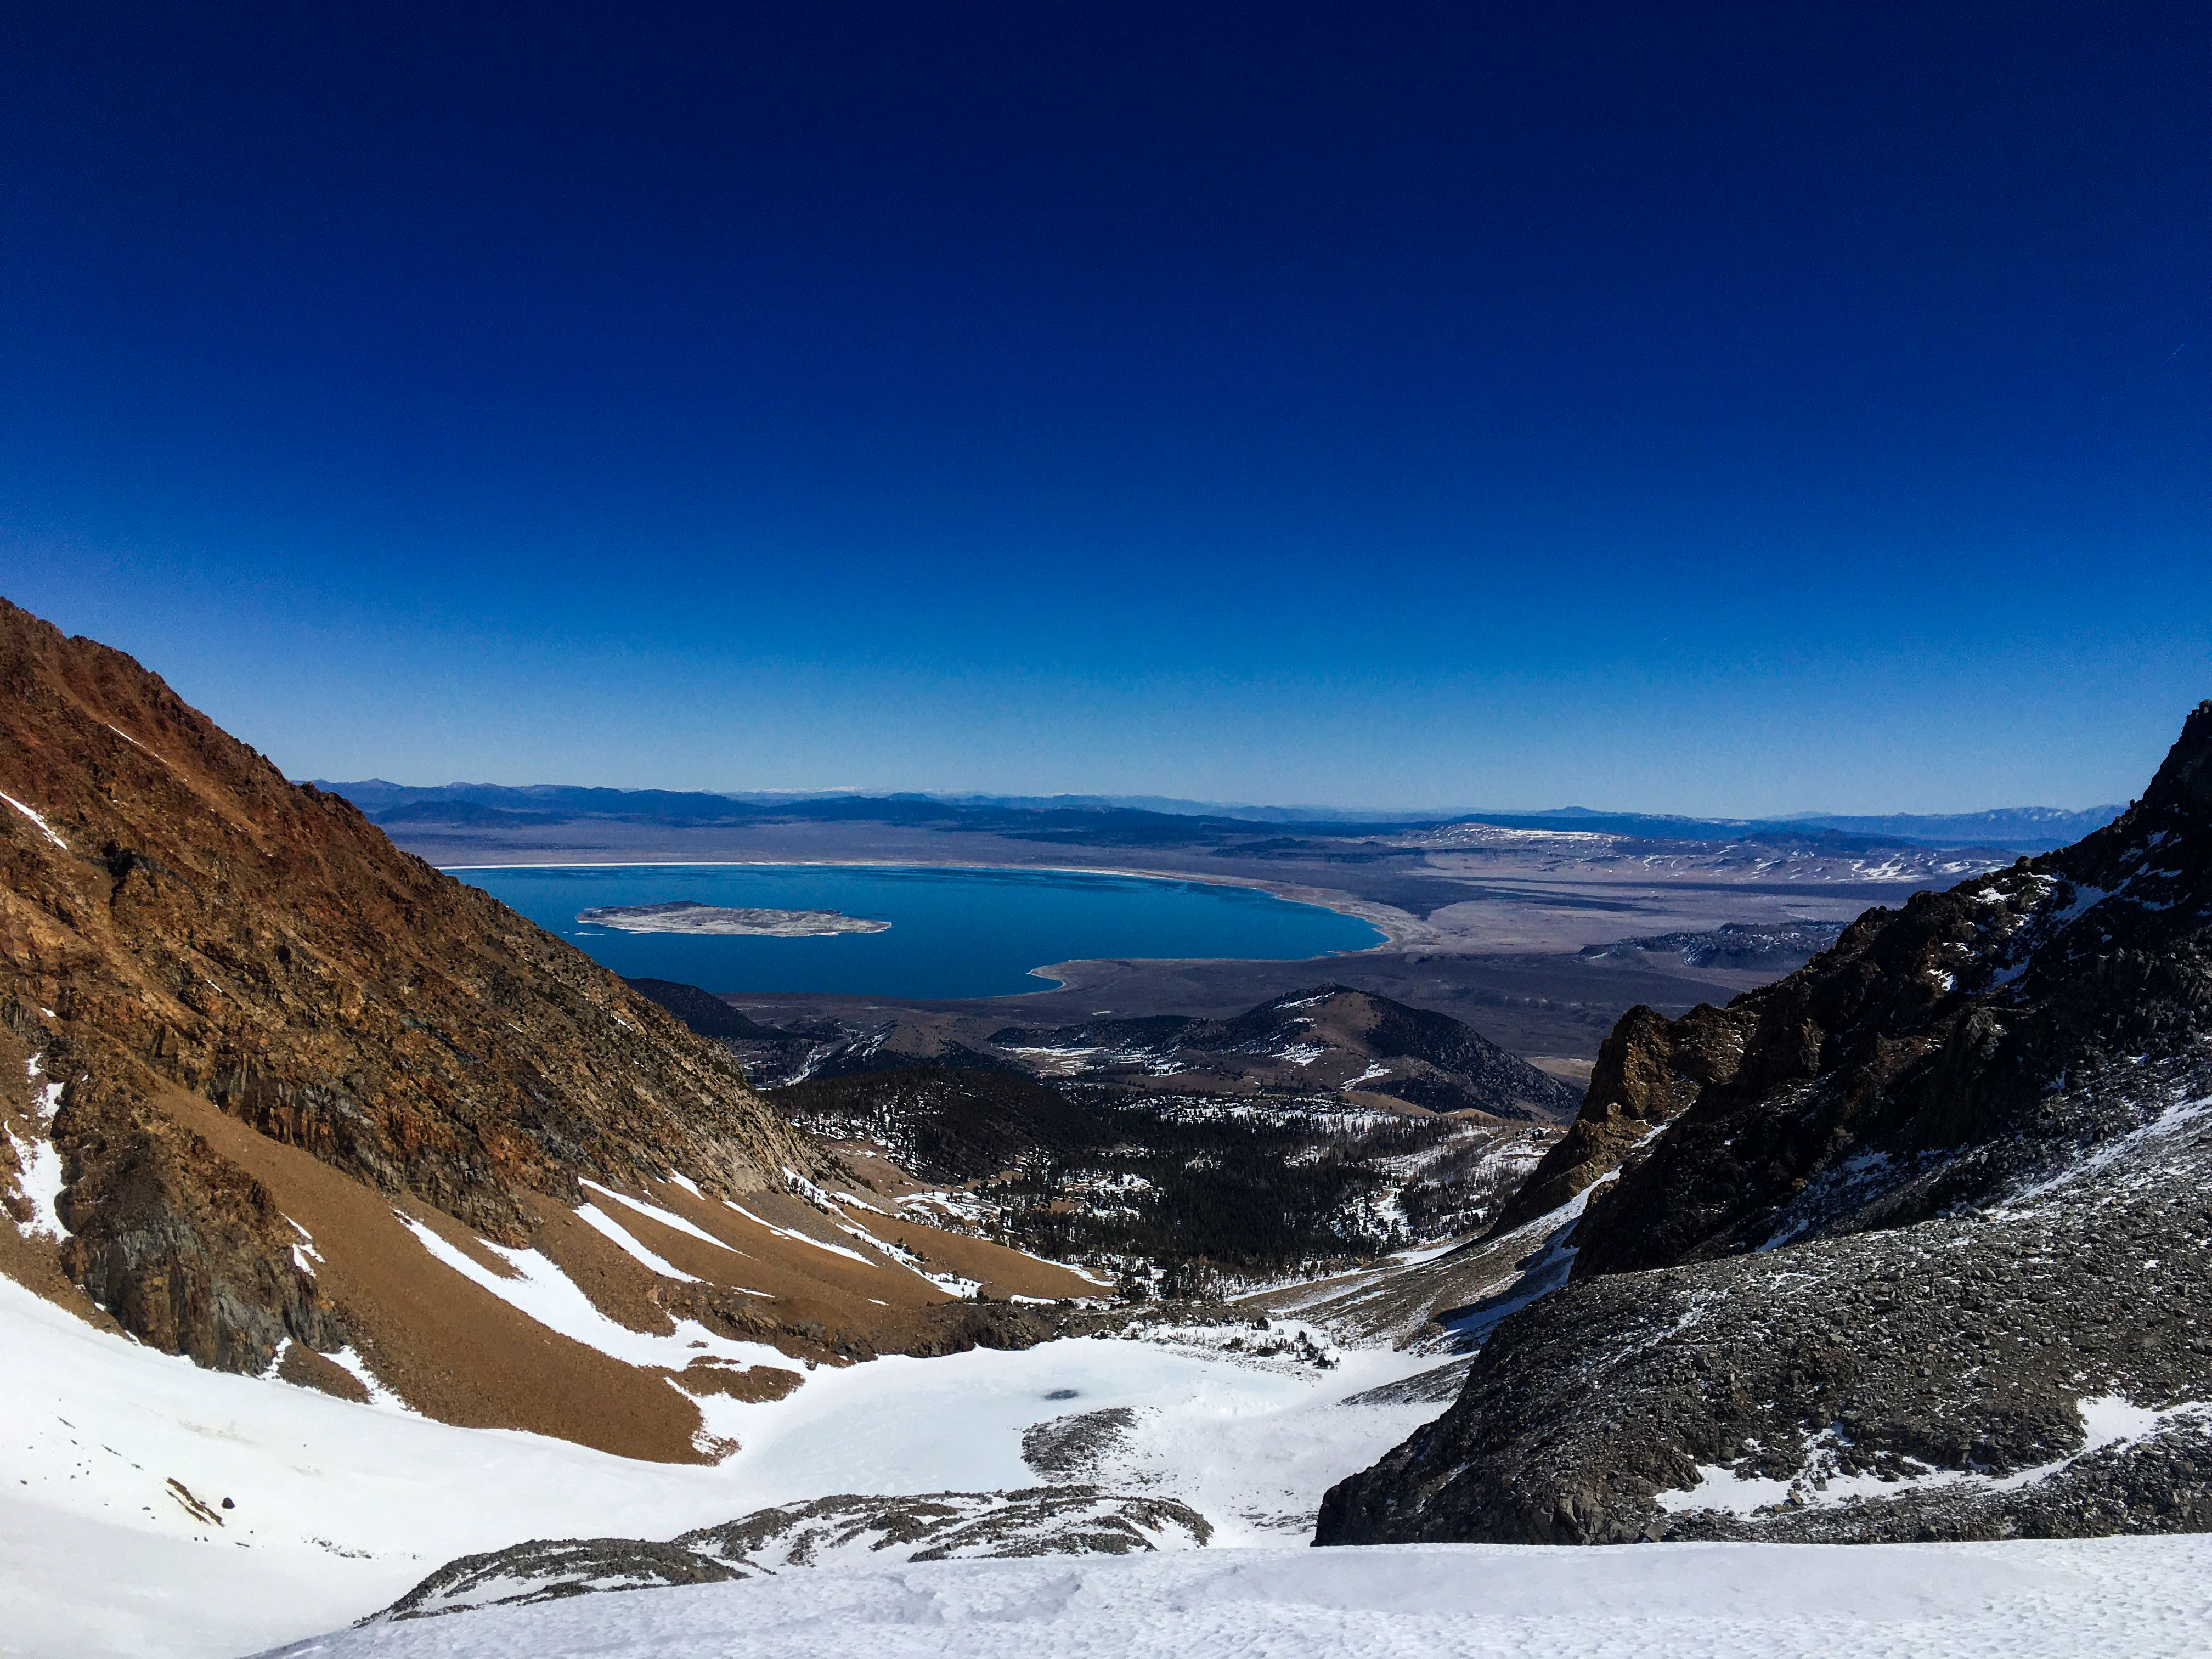 Partial view of Mono Lake from a pass in Yosemite